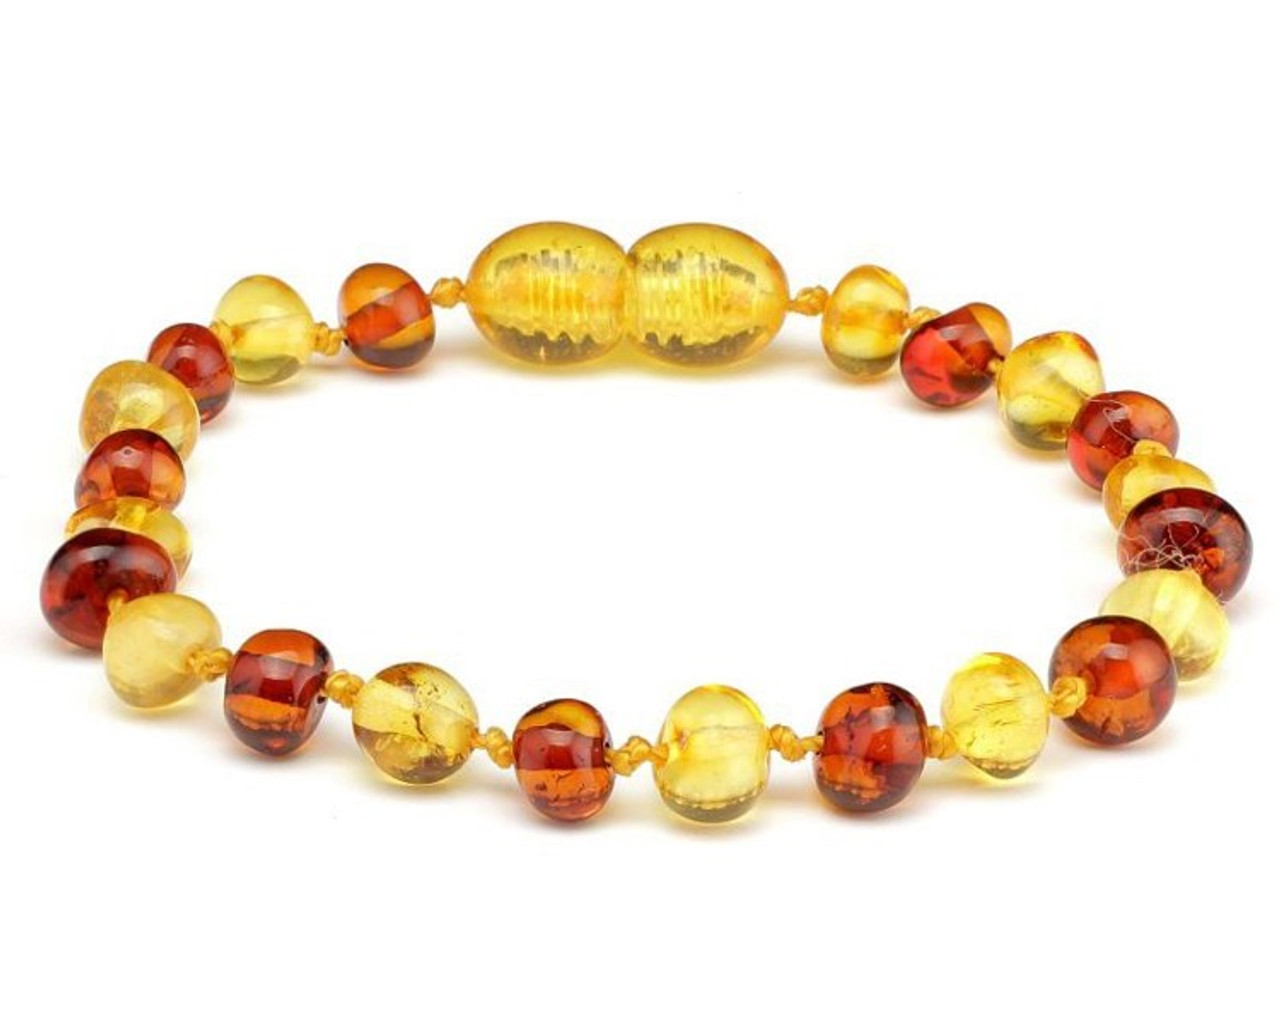 Amber teething necklace and bracelet Baroque Caramel round beads for baby